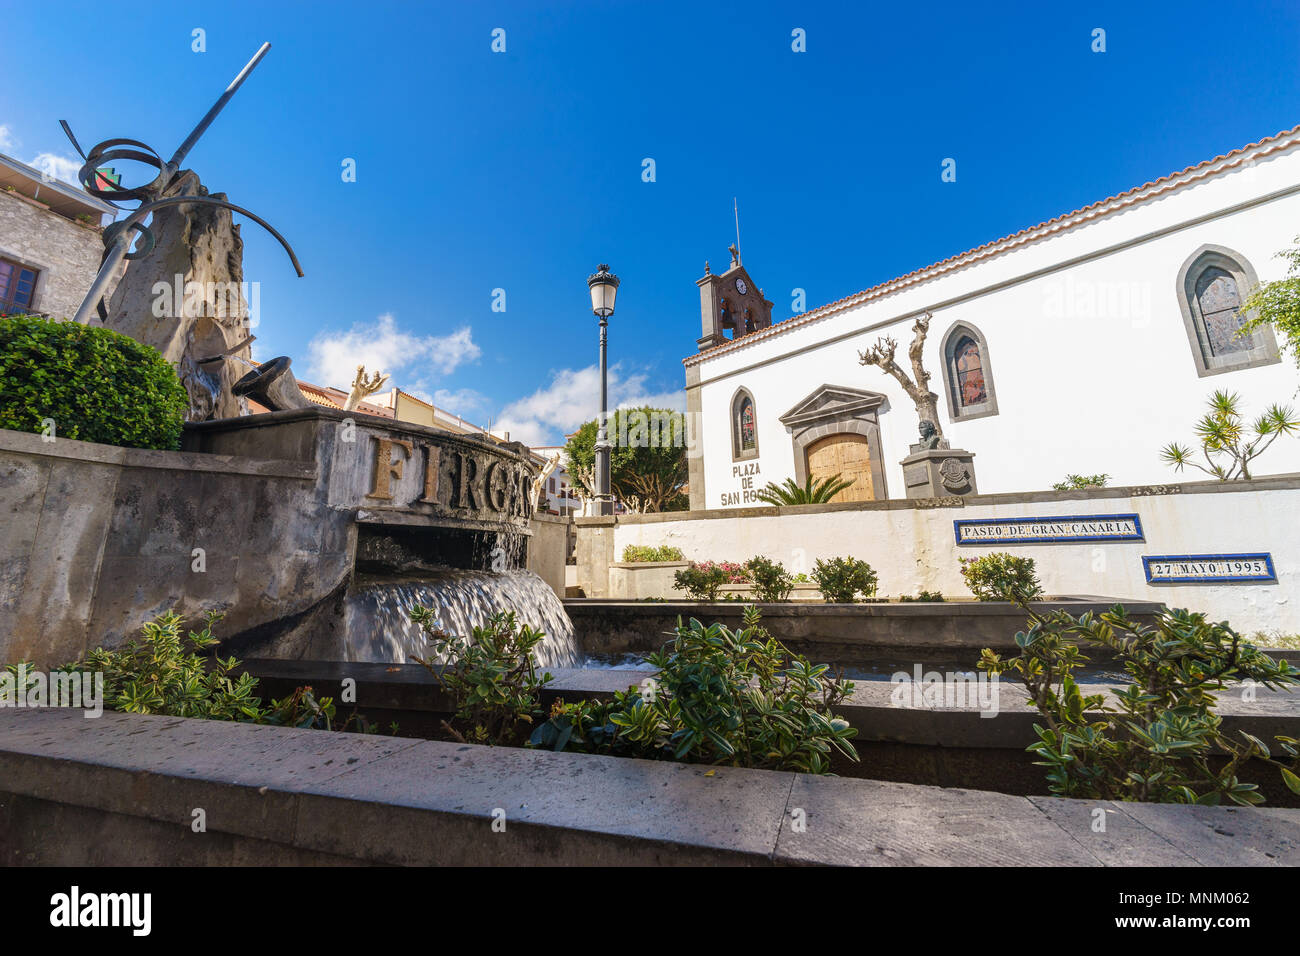 Firgas, Spain - February 27, 2018: Main tourist street Paseo de Gran Canaria founded in 1995 by spanish artists. Stock Photo